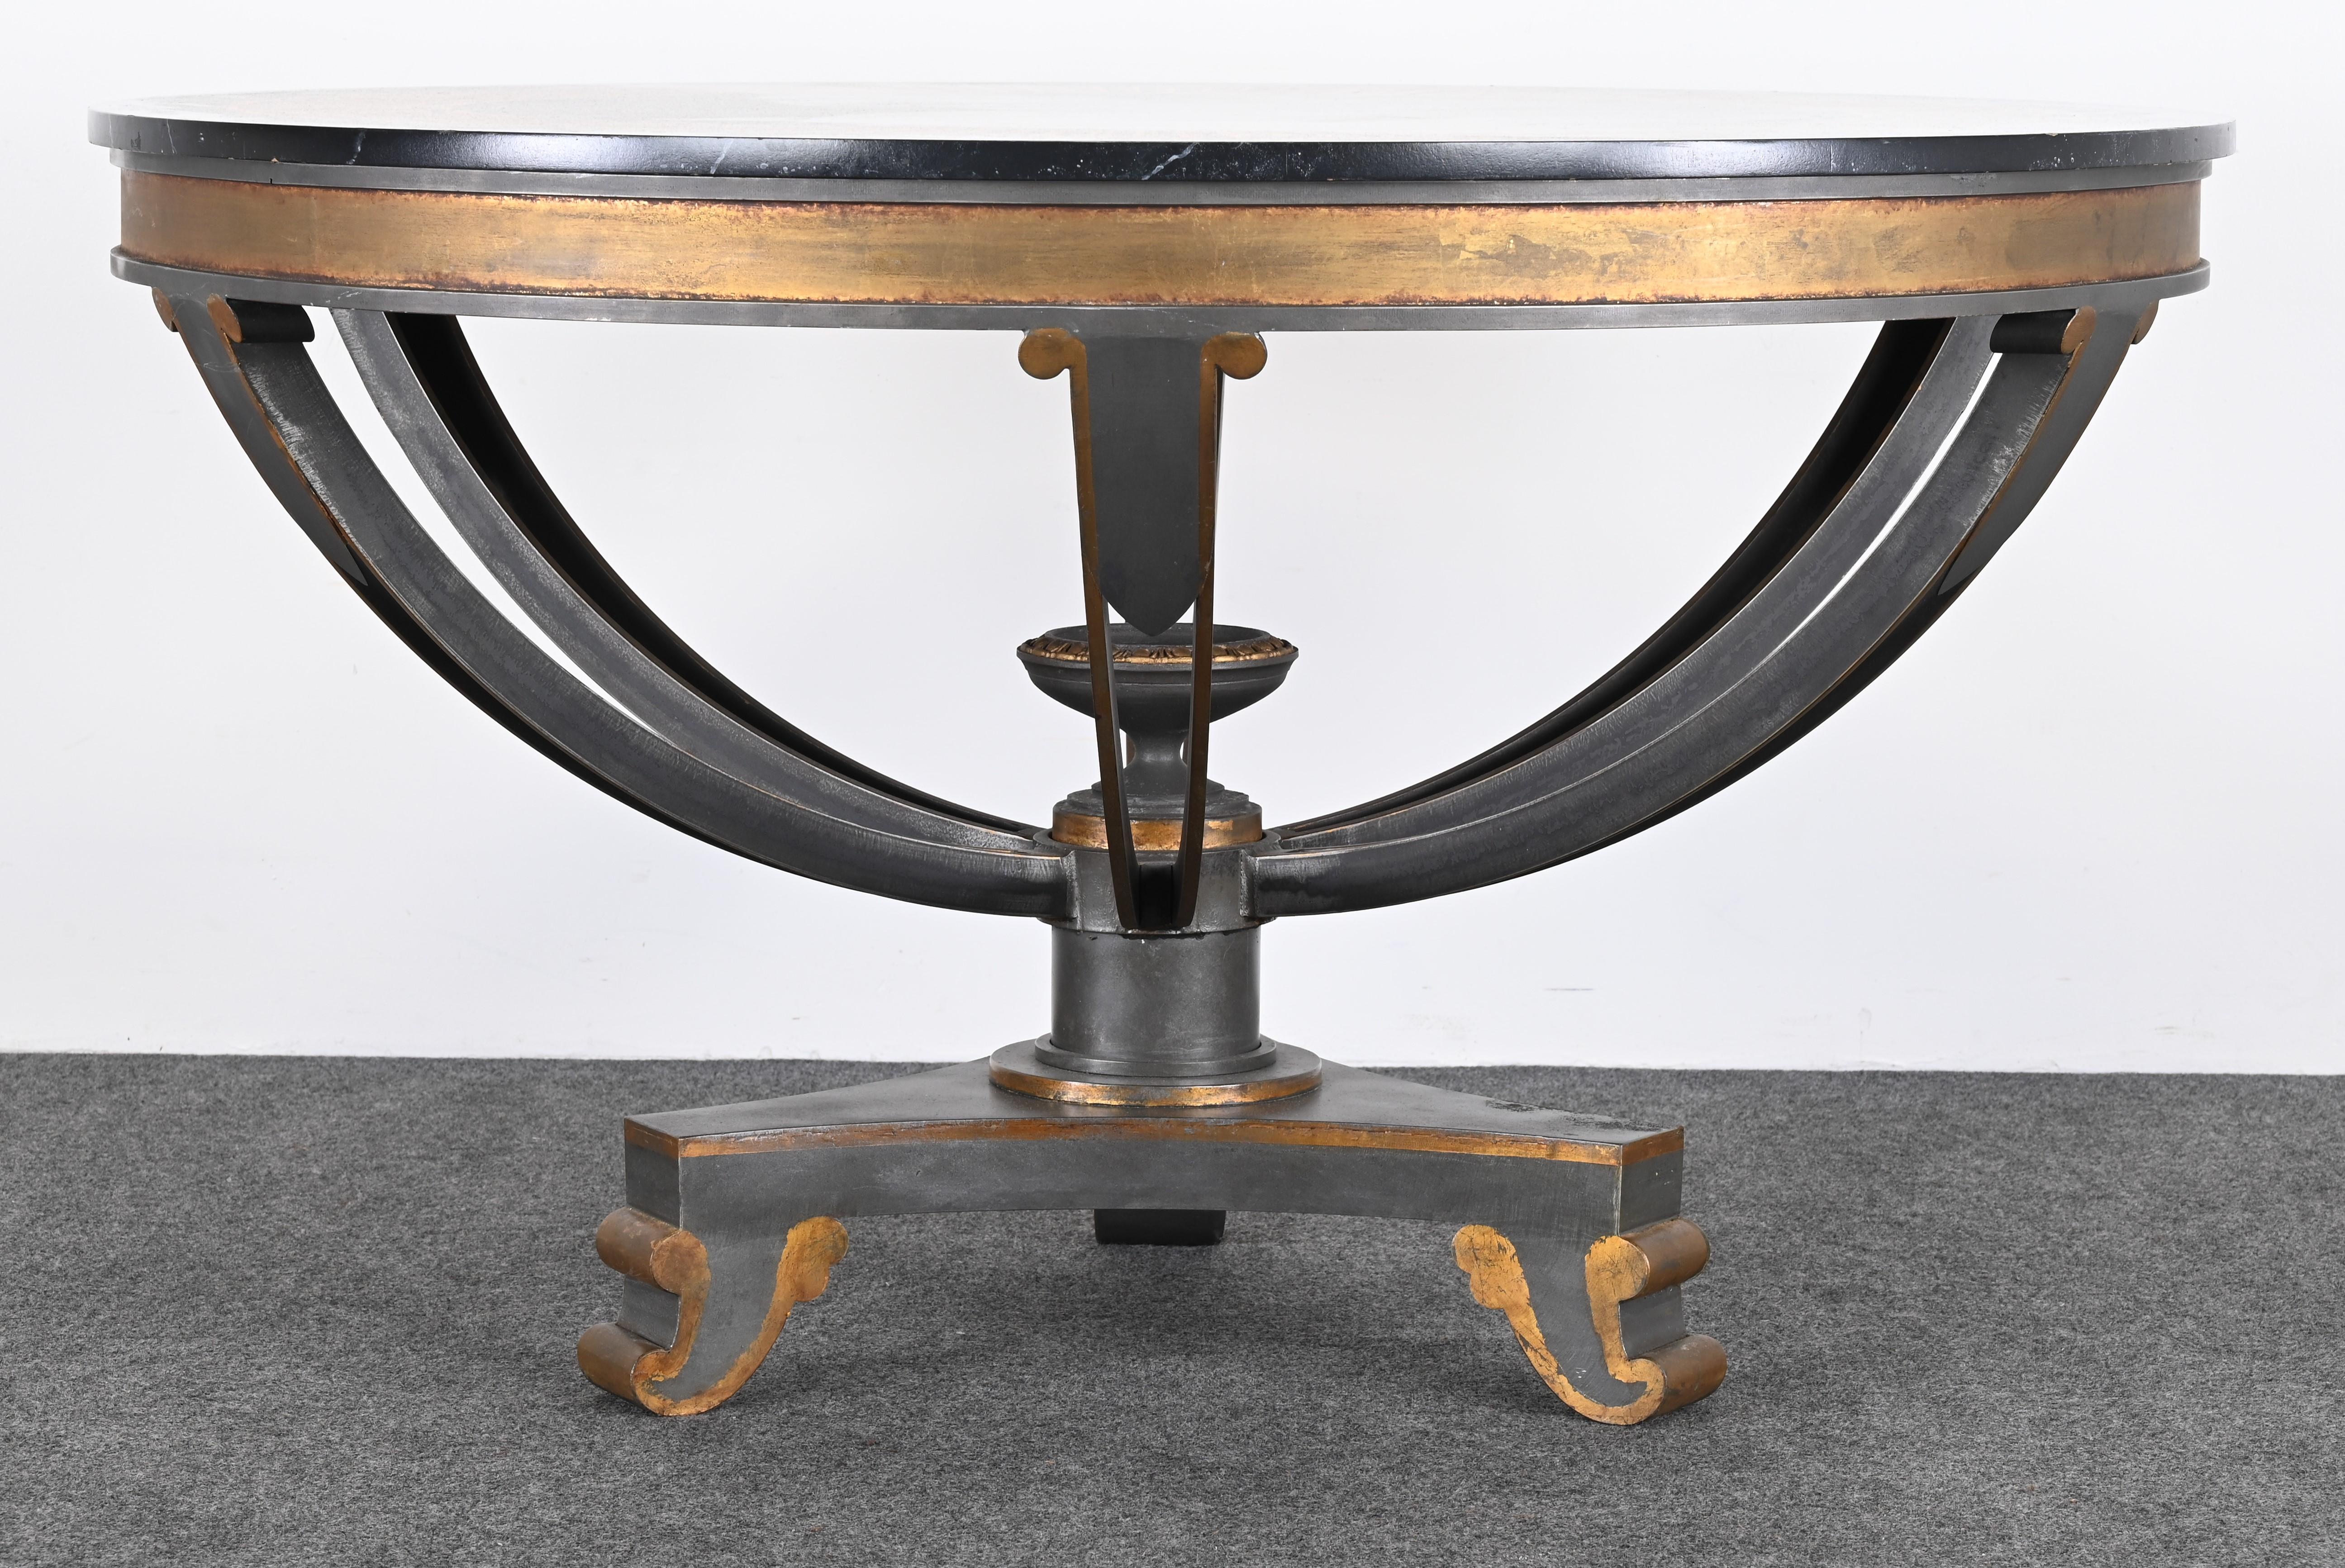 Steel Monumental Table by Niermann Weeks with Neo Classical Top, 20th Century For Sale